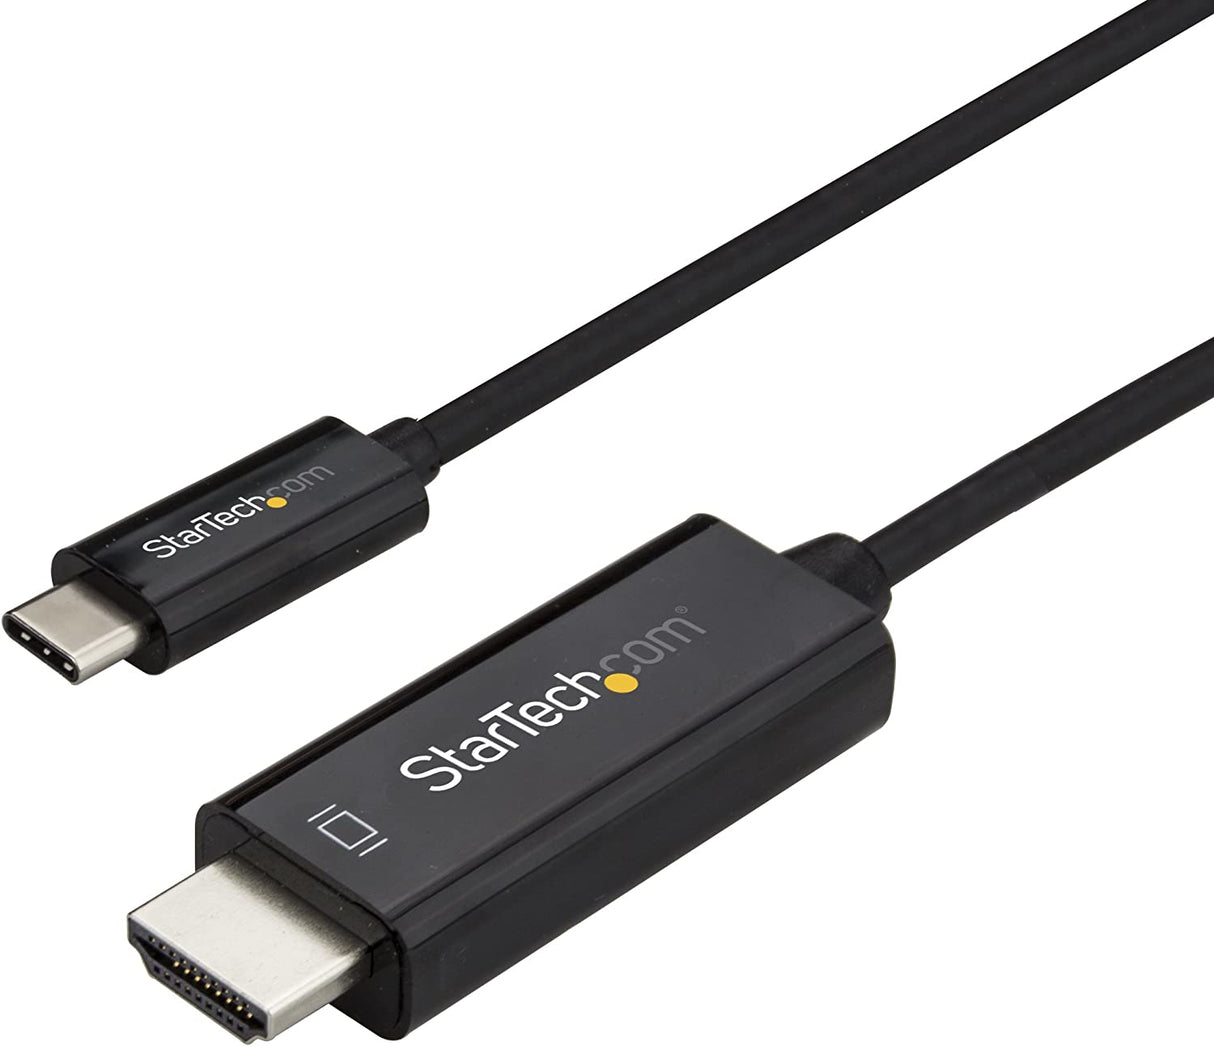 StarTech.com 3ft (1m) USB C to HDMI Cable - 4K 60Hz USB Type C to HDMI 2.0 Video Adapter Cable - Thunderbolt 3 Compatible - Laptop to HDMI Monitor/Display - DP 1.2 Alt Mode HBR2 - Black (CDP2HD1MBNL) 3 ft / 1 m Black